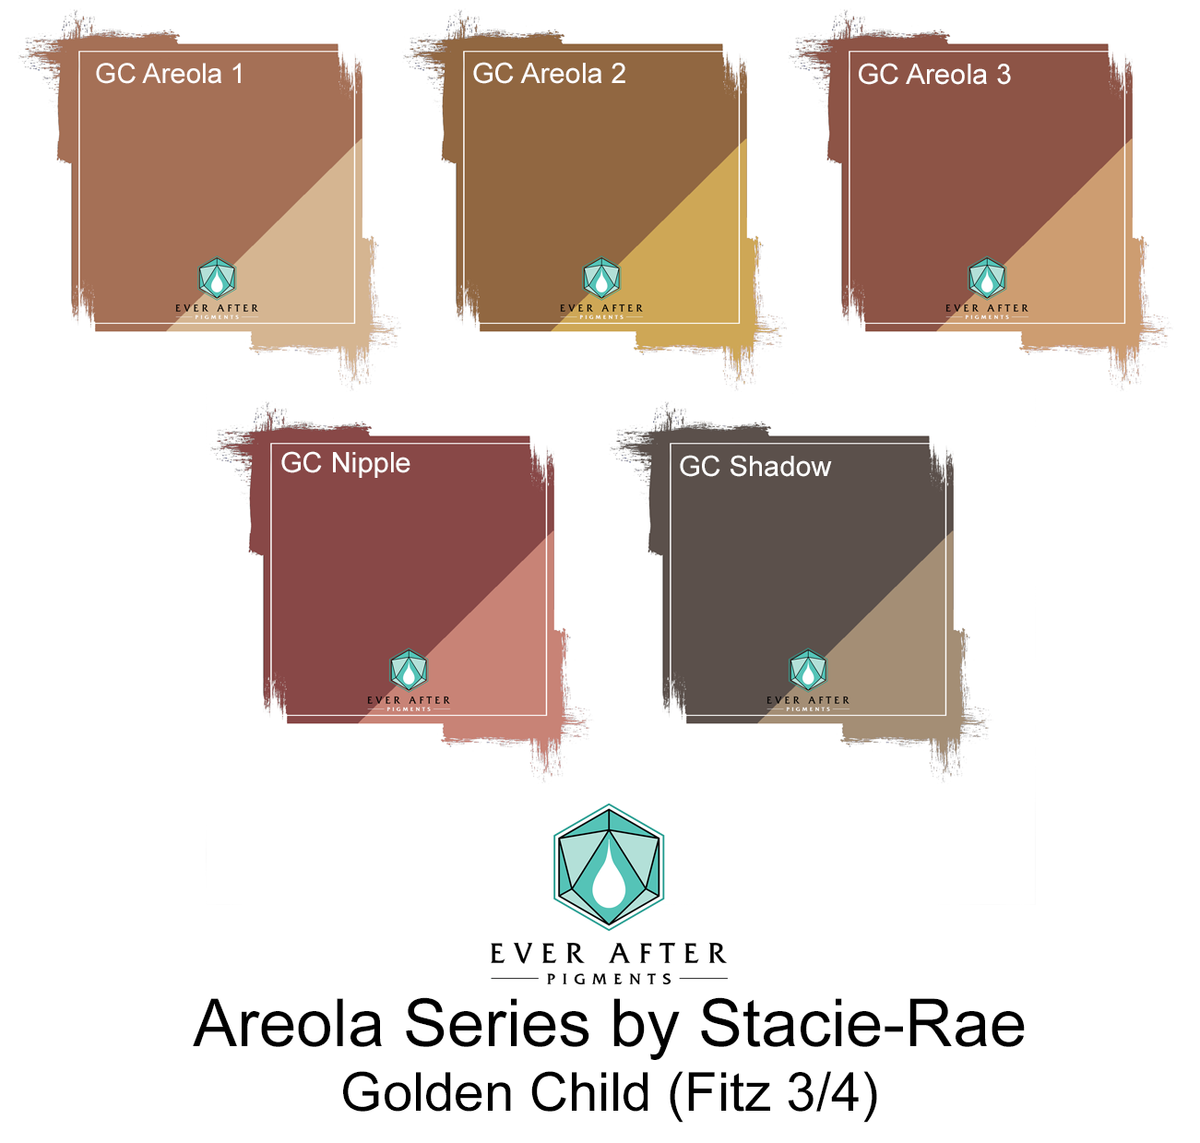 Areola Series Golden Child by Stacie-Rae